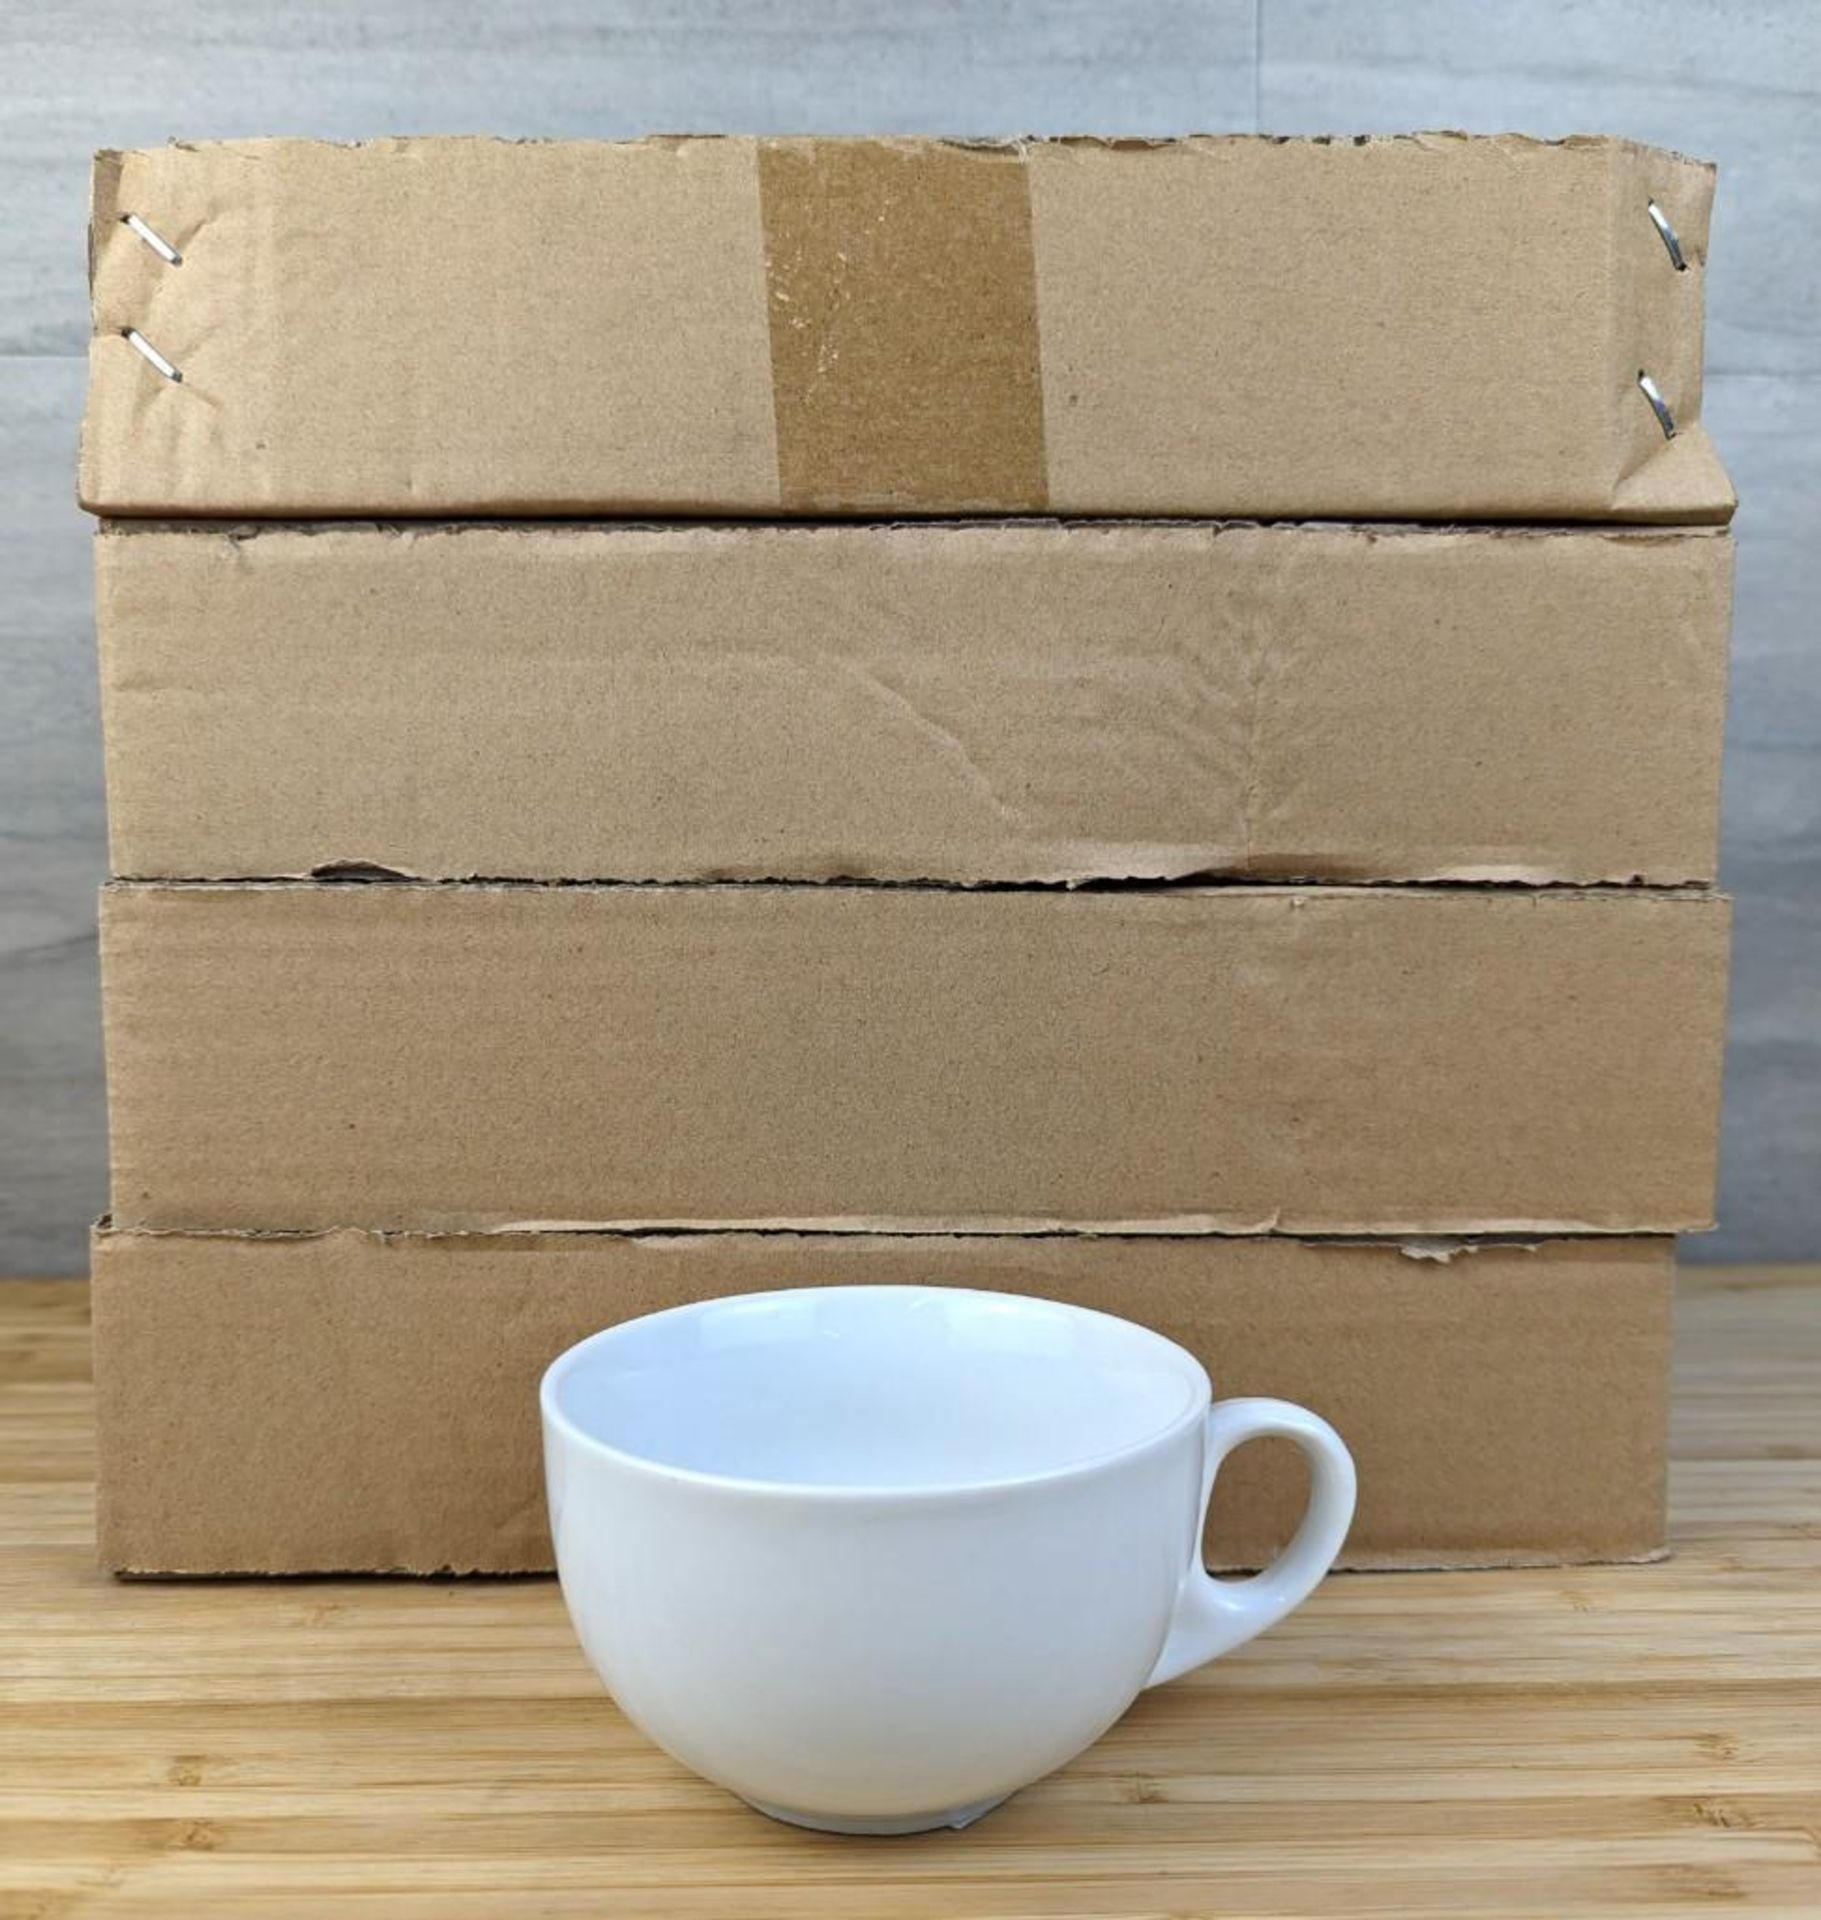 CASE OF 7 OZ. TAPERED COFFEE CUP, JOHNSON ROSE 90181, 72 PER CASE - NEW